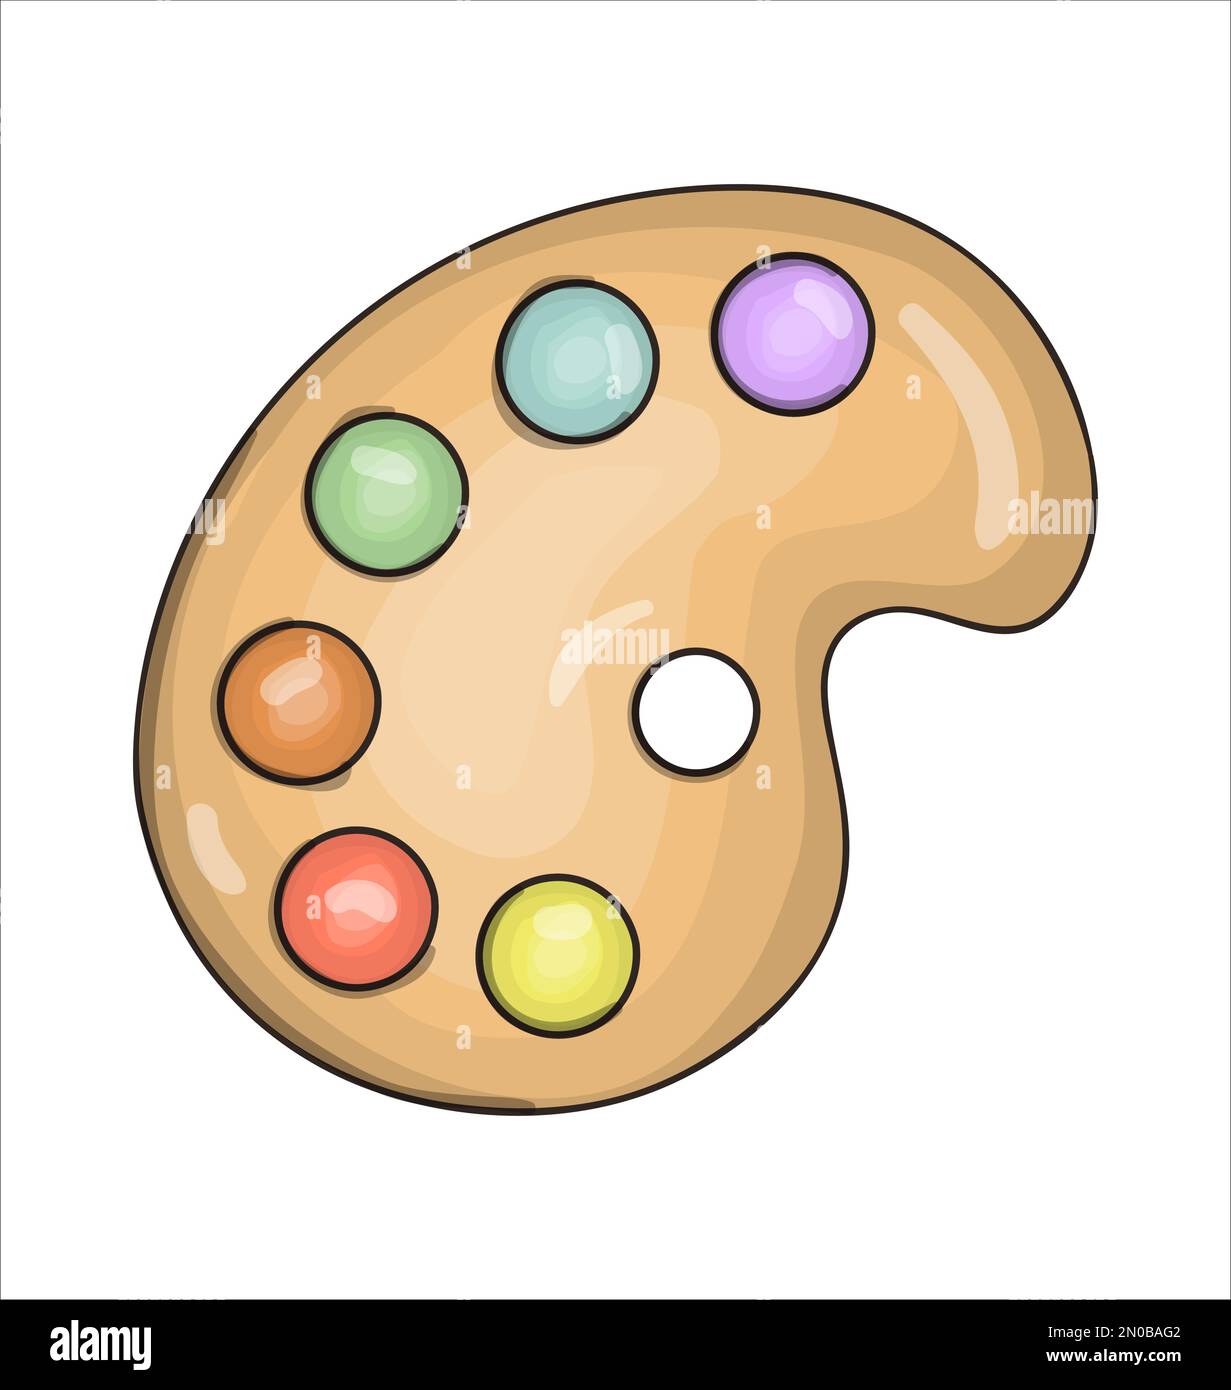 Painting Palette With Paintbrush Icon In Cartoon Style Isolated On